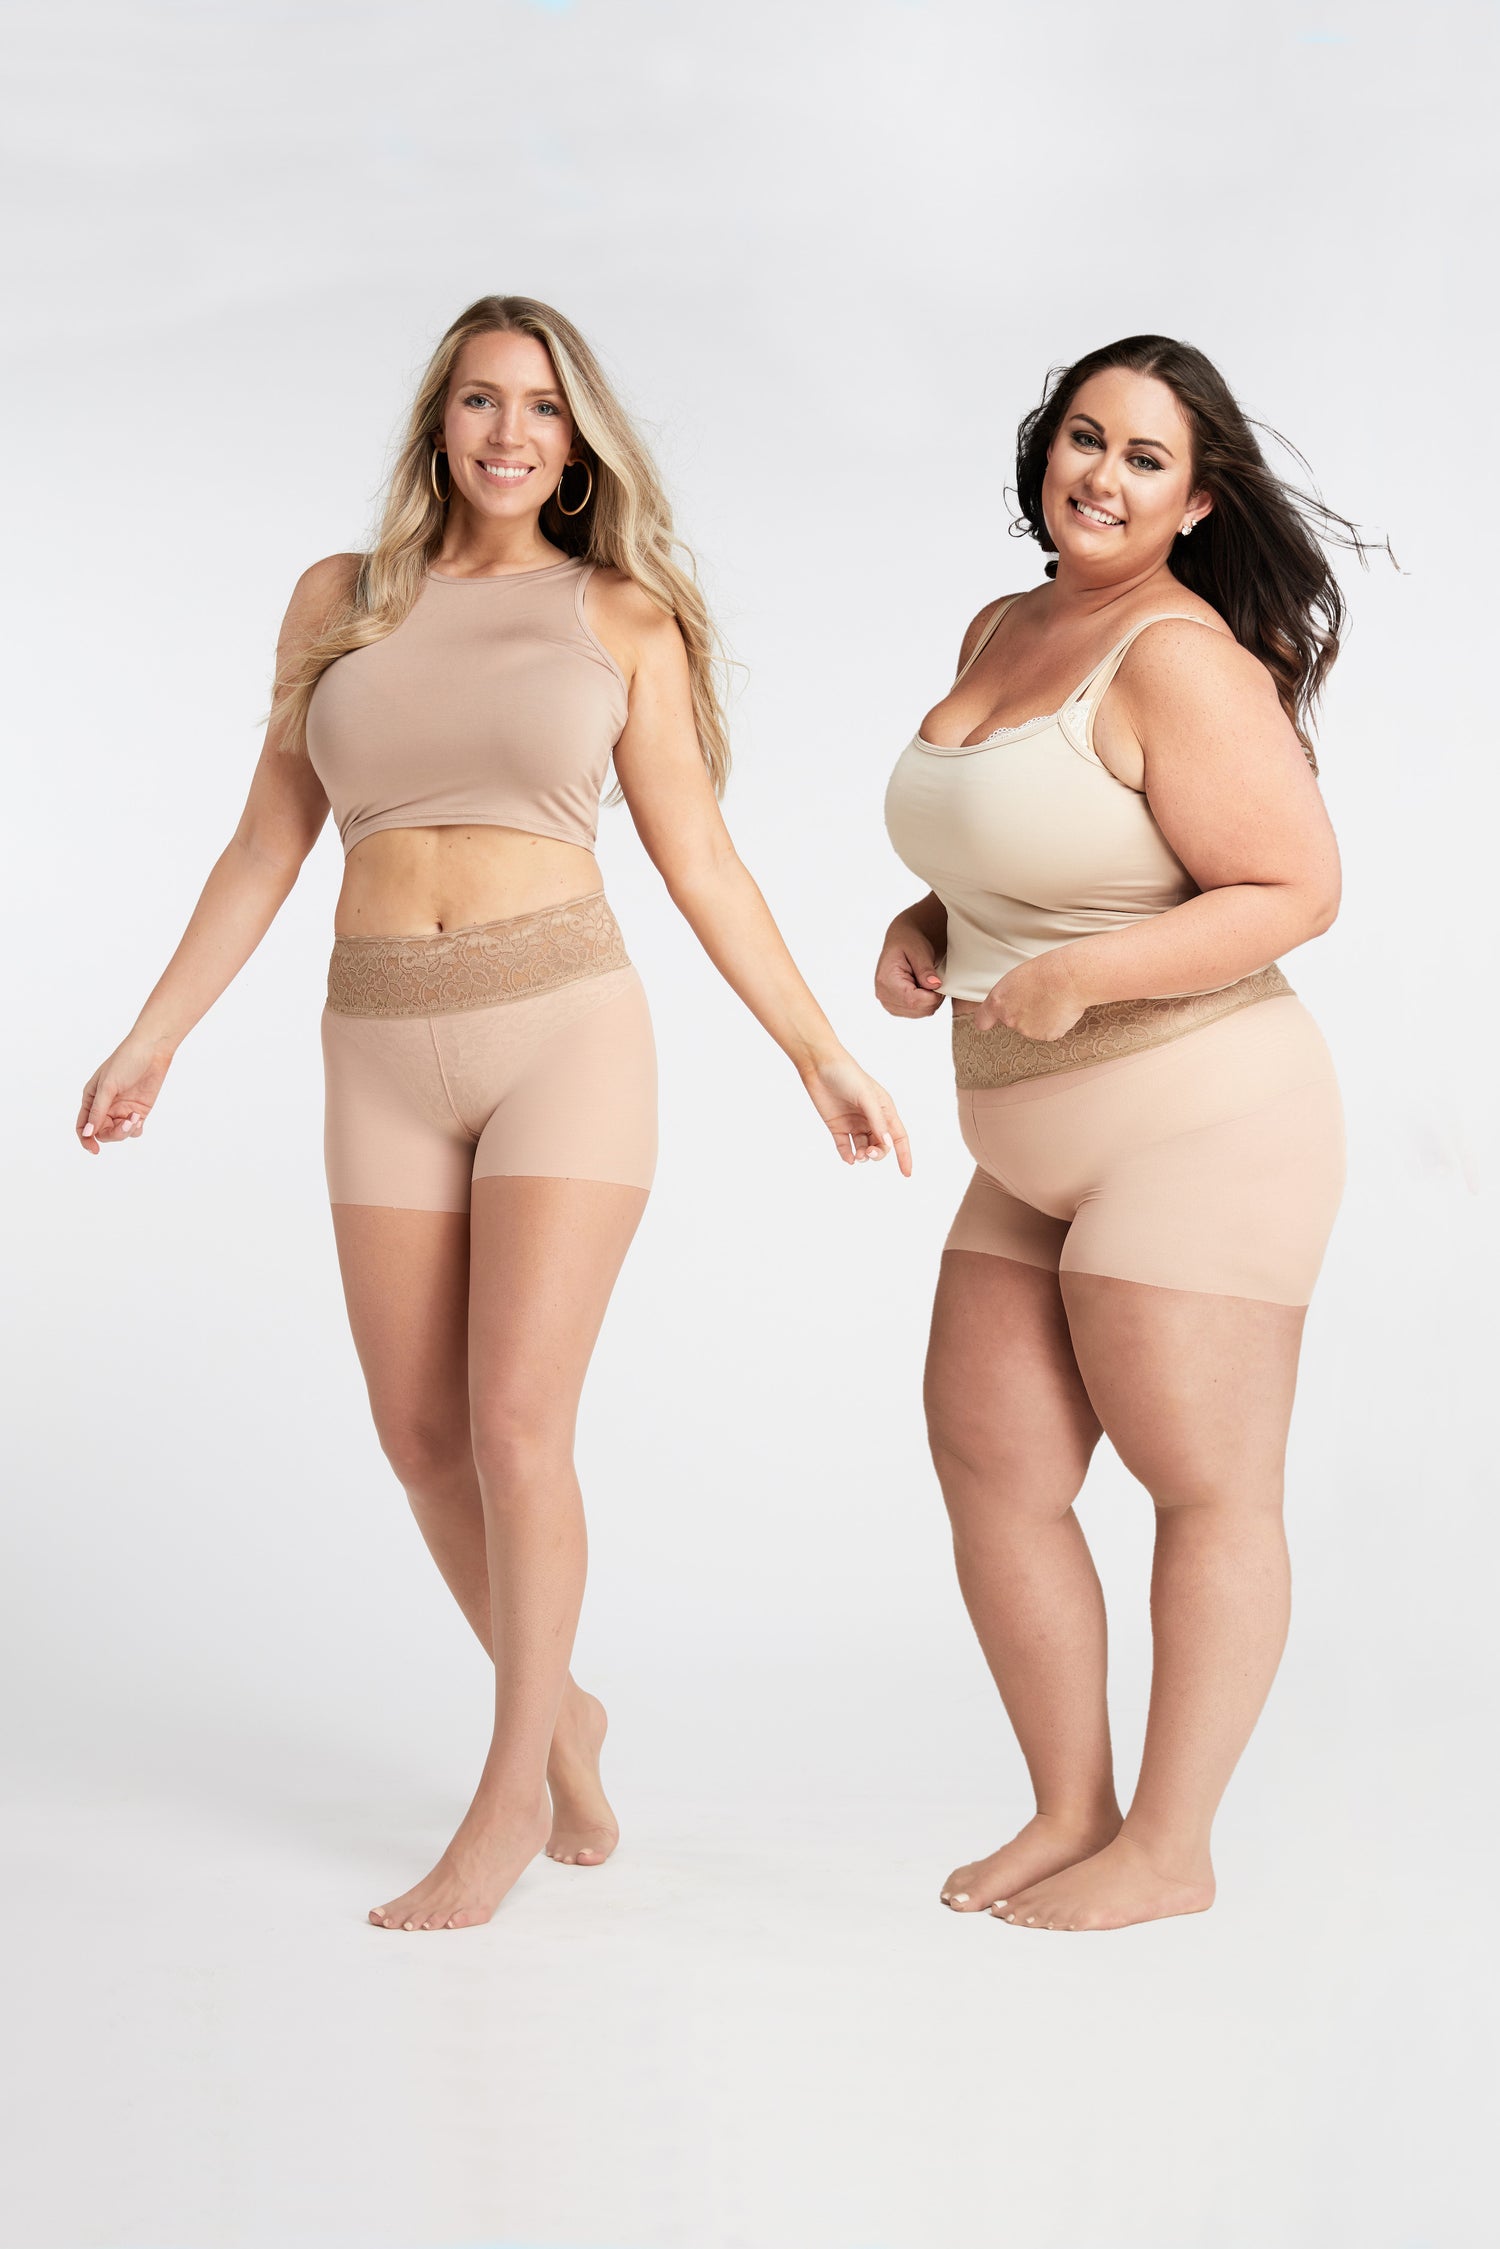 Hipstik Legwear: 💫 All Sizes of Hipstik Nude Sheers are Back in Stock! 💫